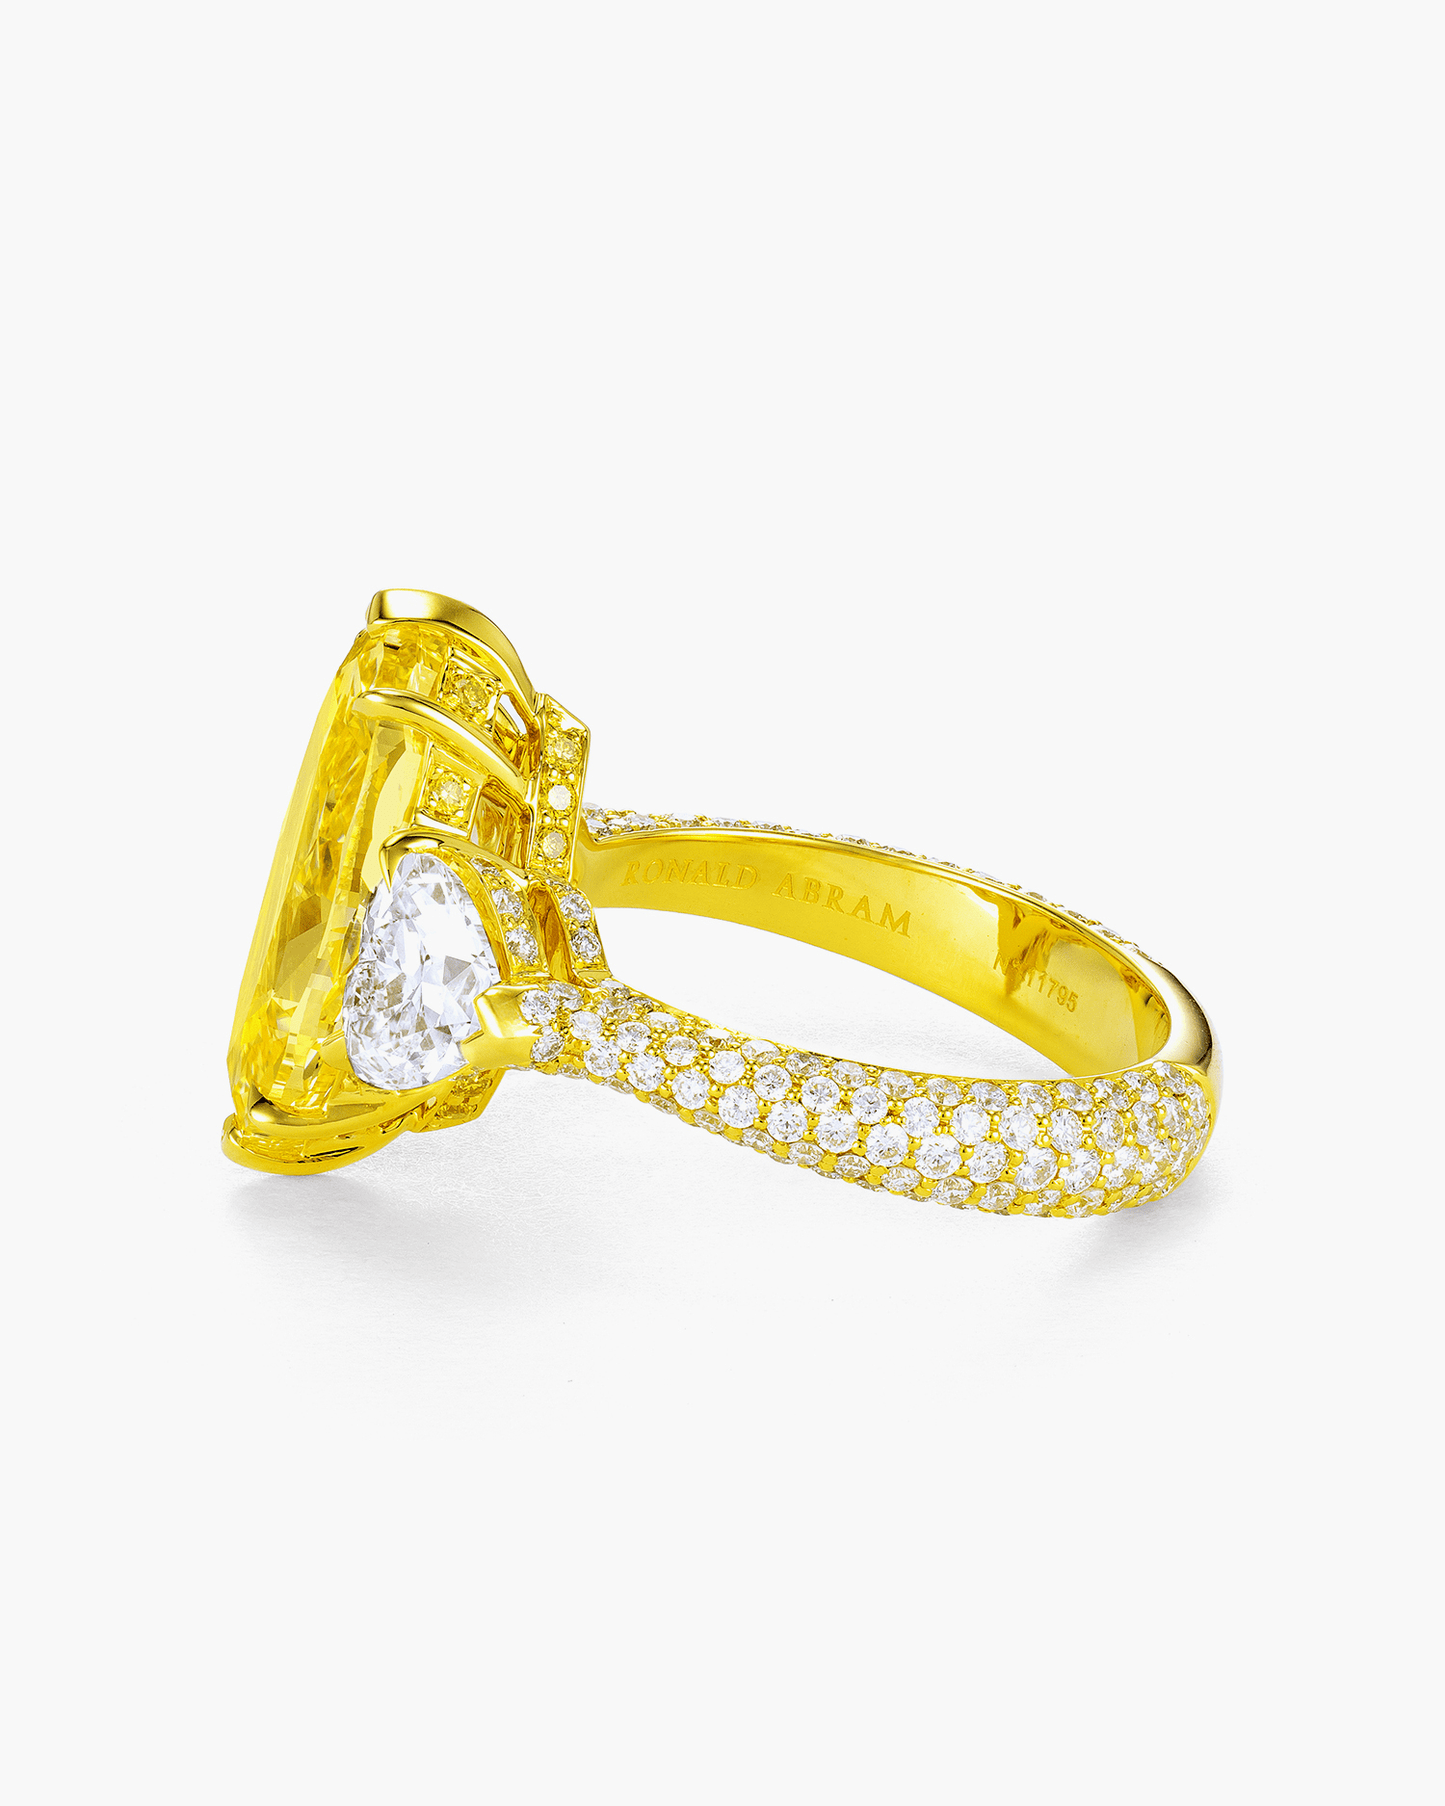 4.53 carat Marquise Shape Yellow and White Diamond Ring